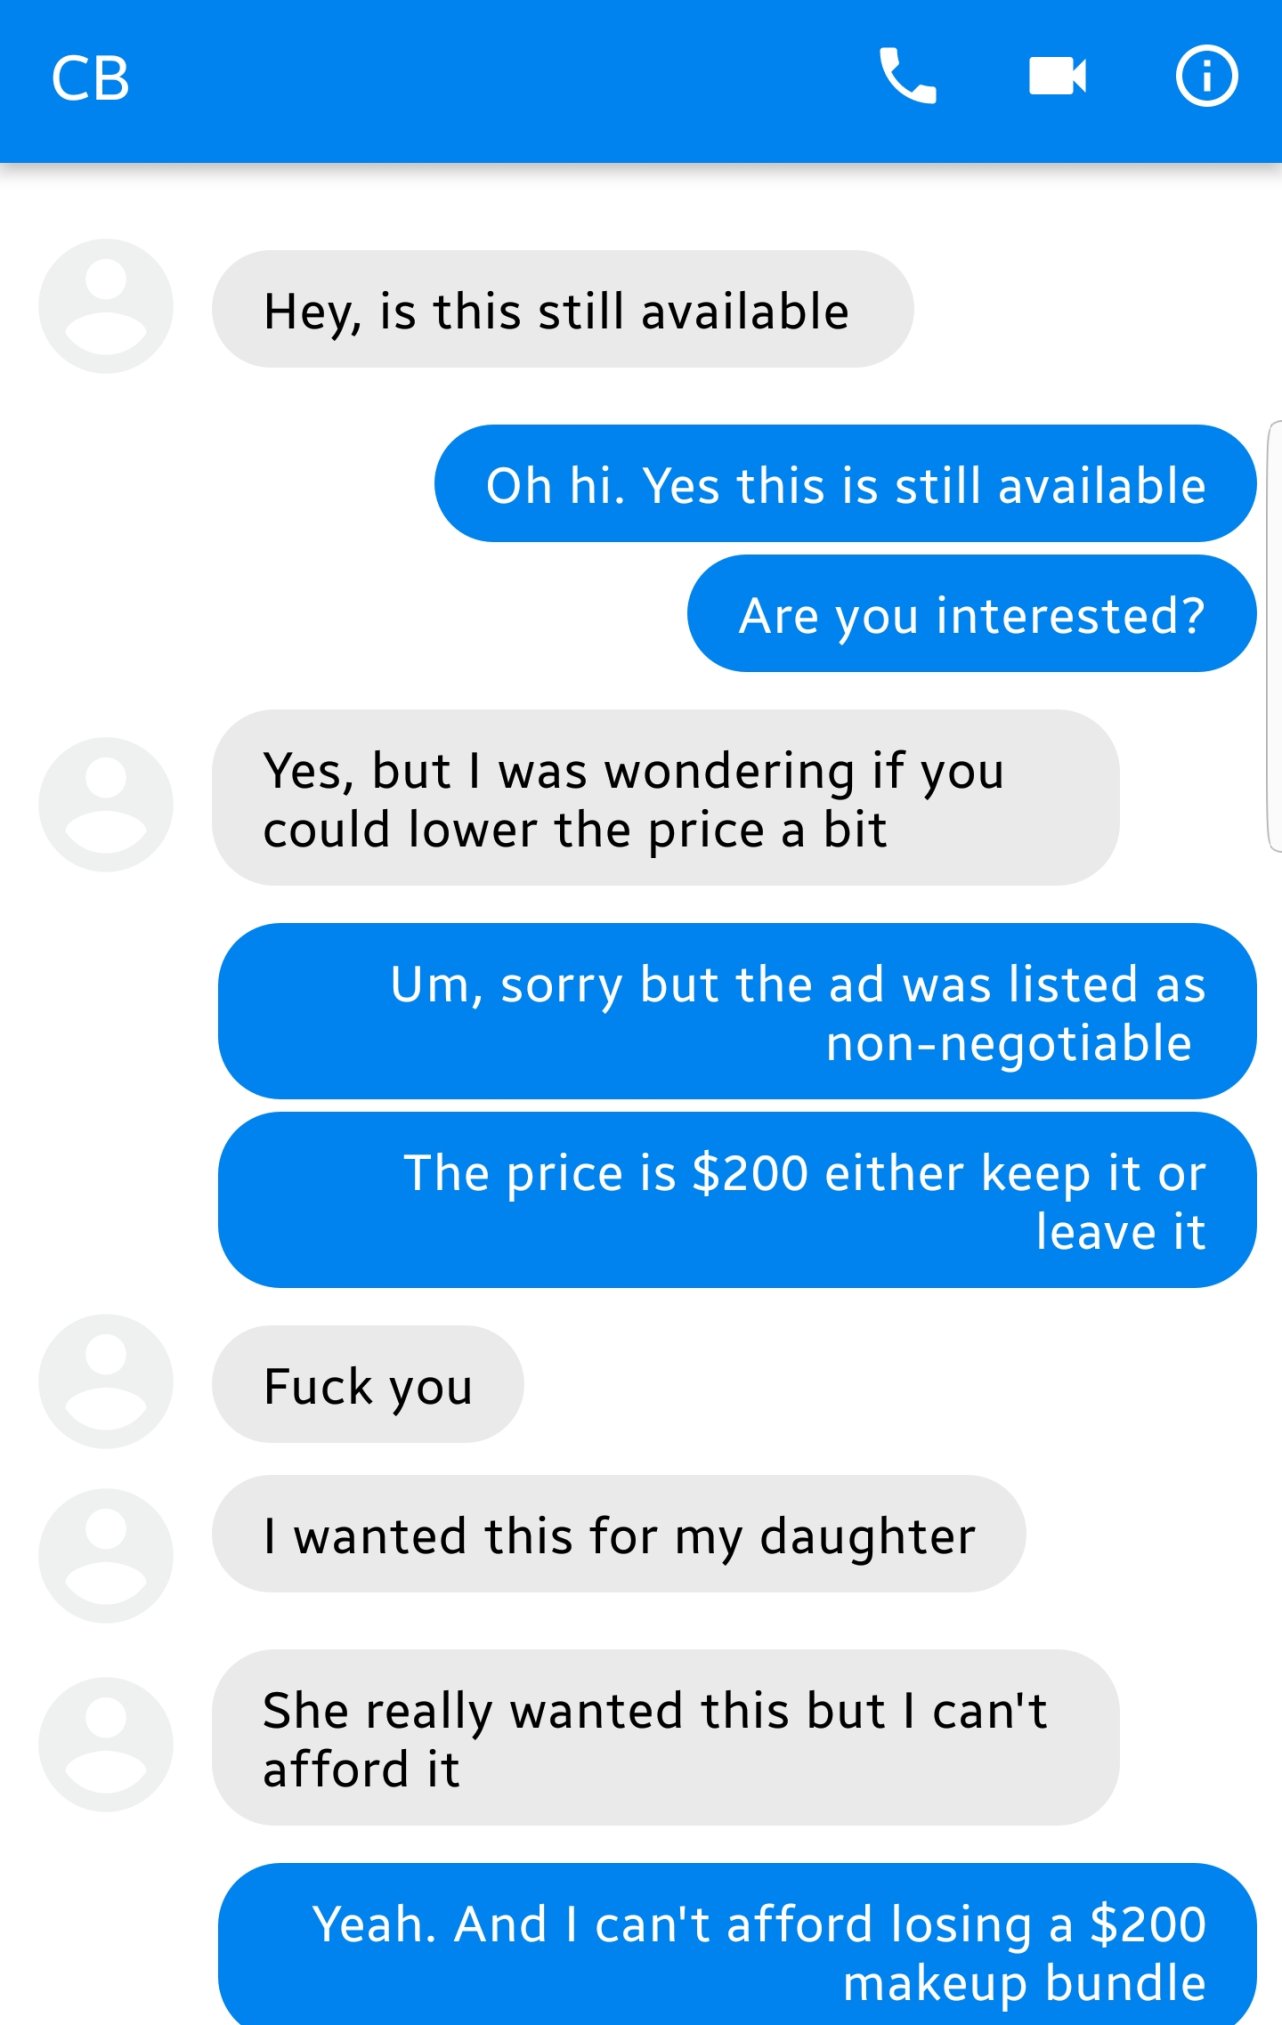 web page - Hey, is this still available Oh hi. Yes this is still available Are you interested? Yes, but I was wondering if you could lower the price a bit Um, sorry but the ad was listed as nonnegotiable The price is $200 either keep it or leave it Fuck y